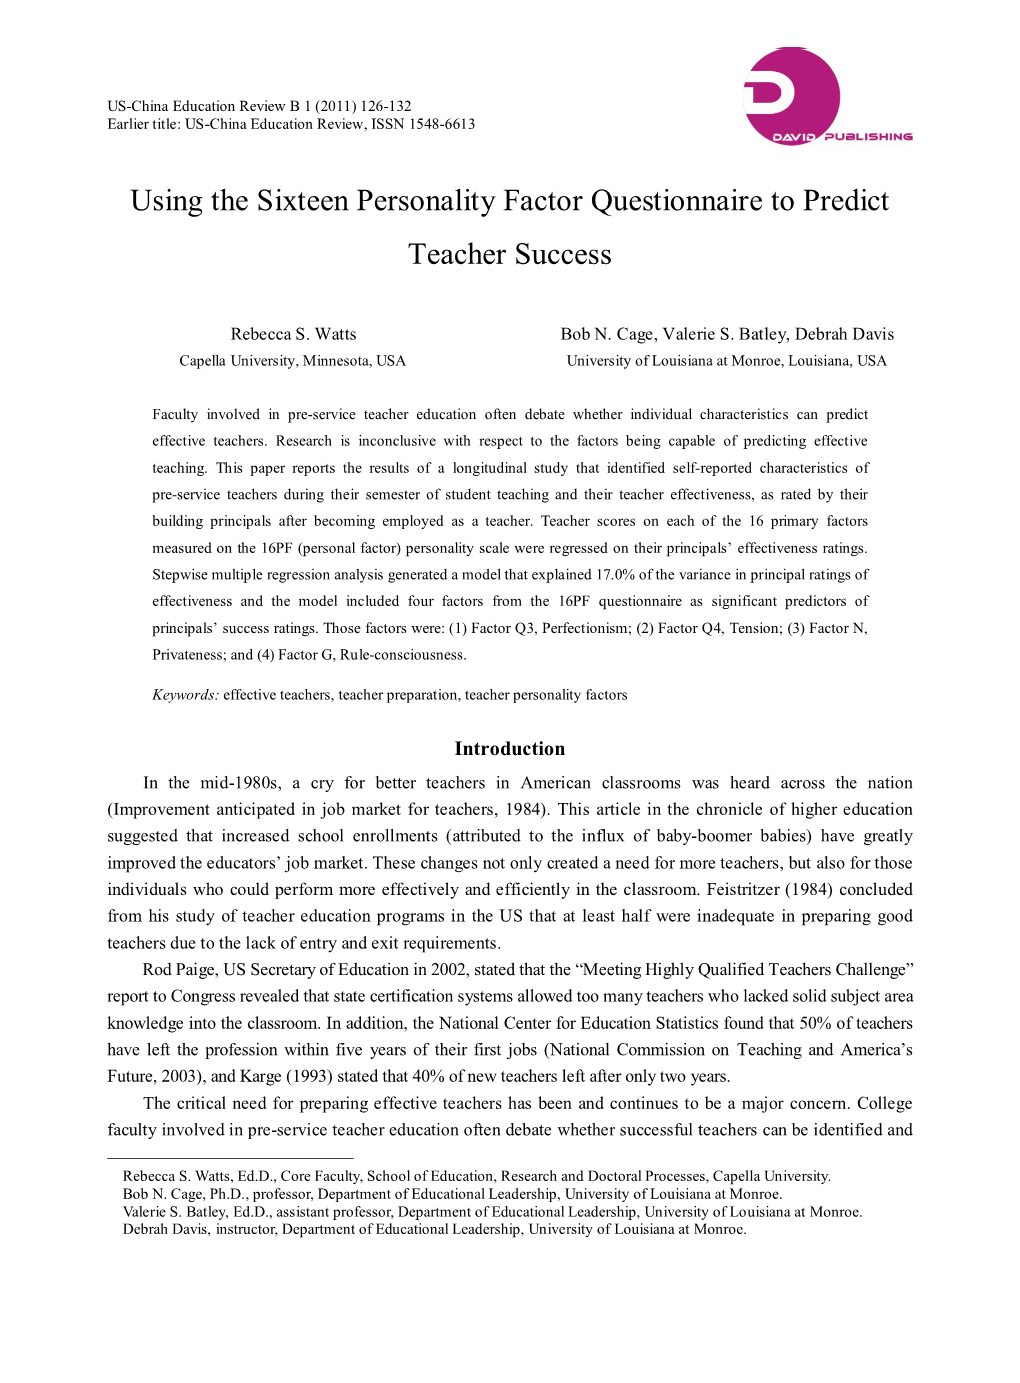 Using the Sixteen Personality Factor Questionnaire to Predict Teacher Success